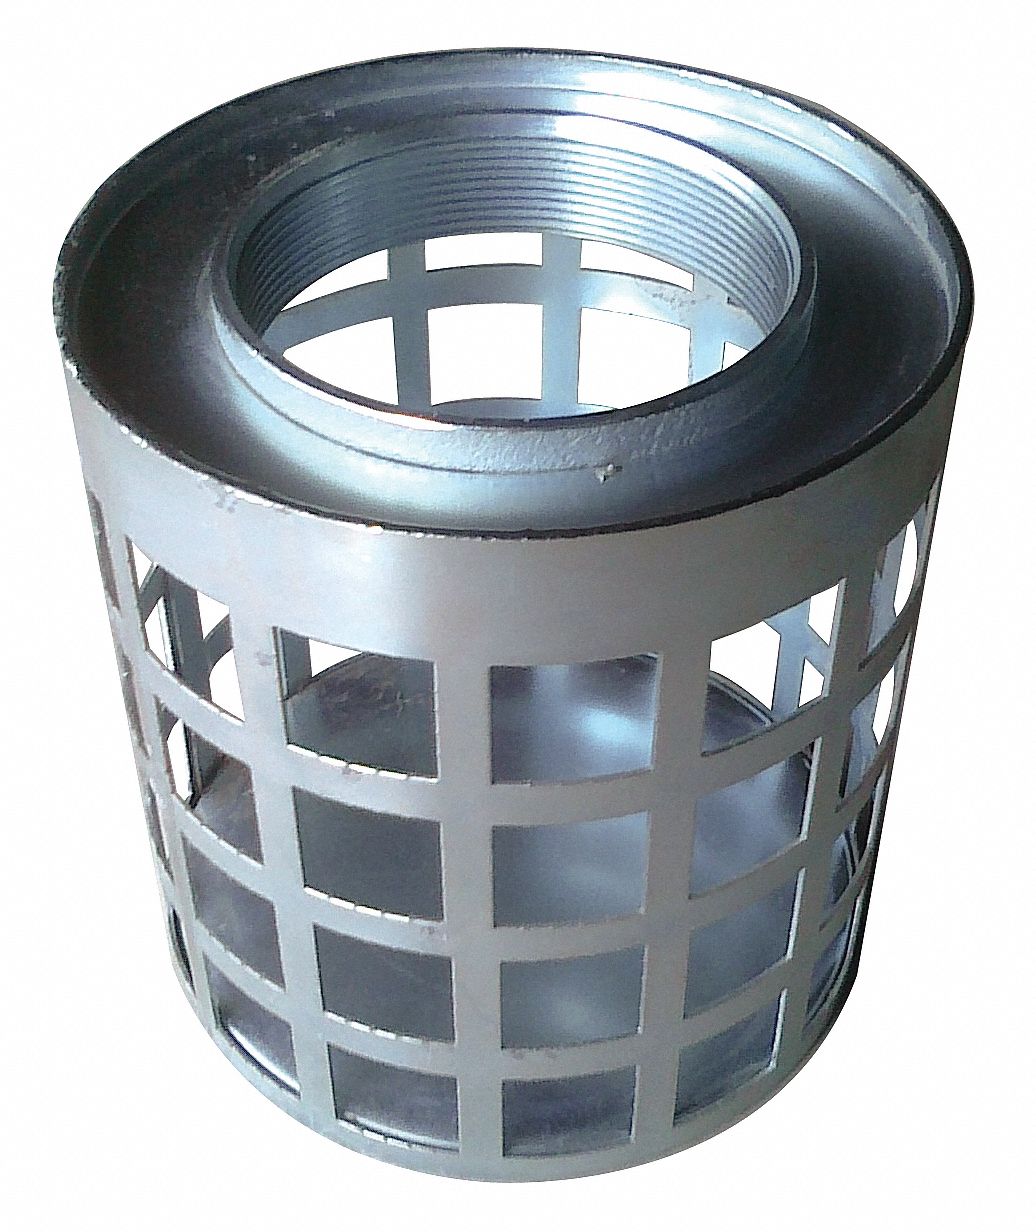 5RWL8 - Suct Strainer 11 Dia 8 NPT Side Sq Perf